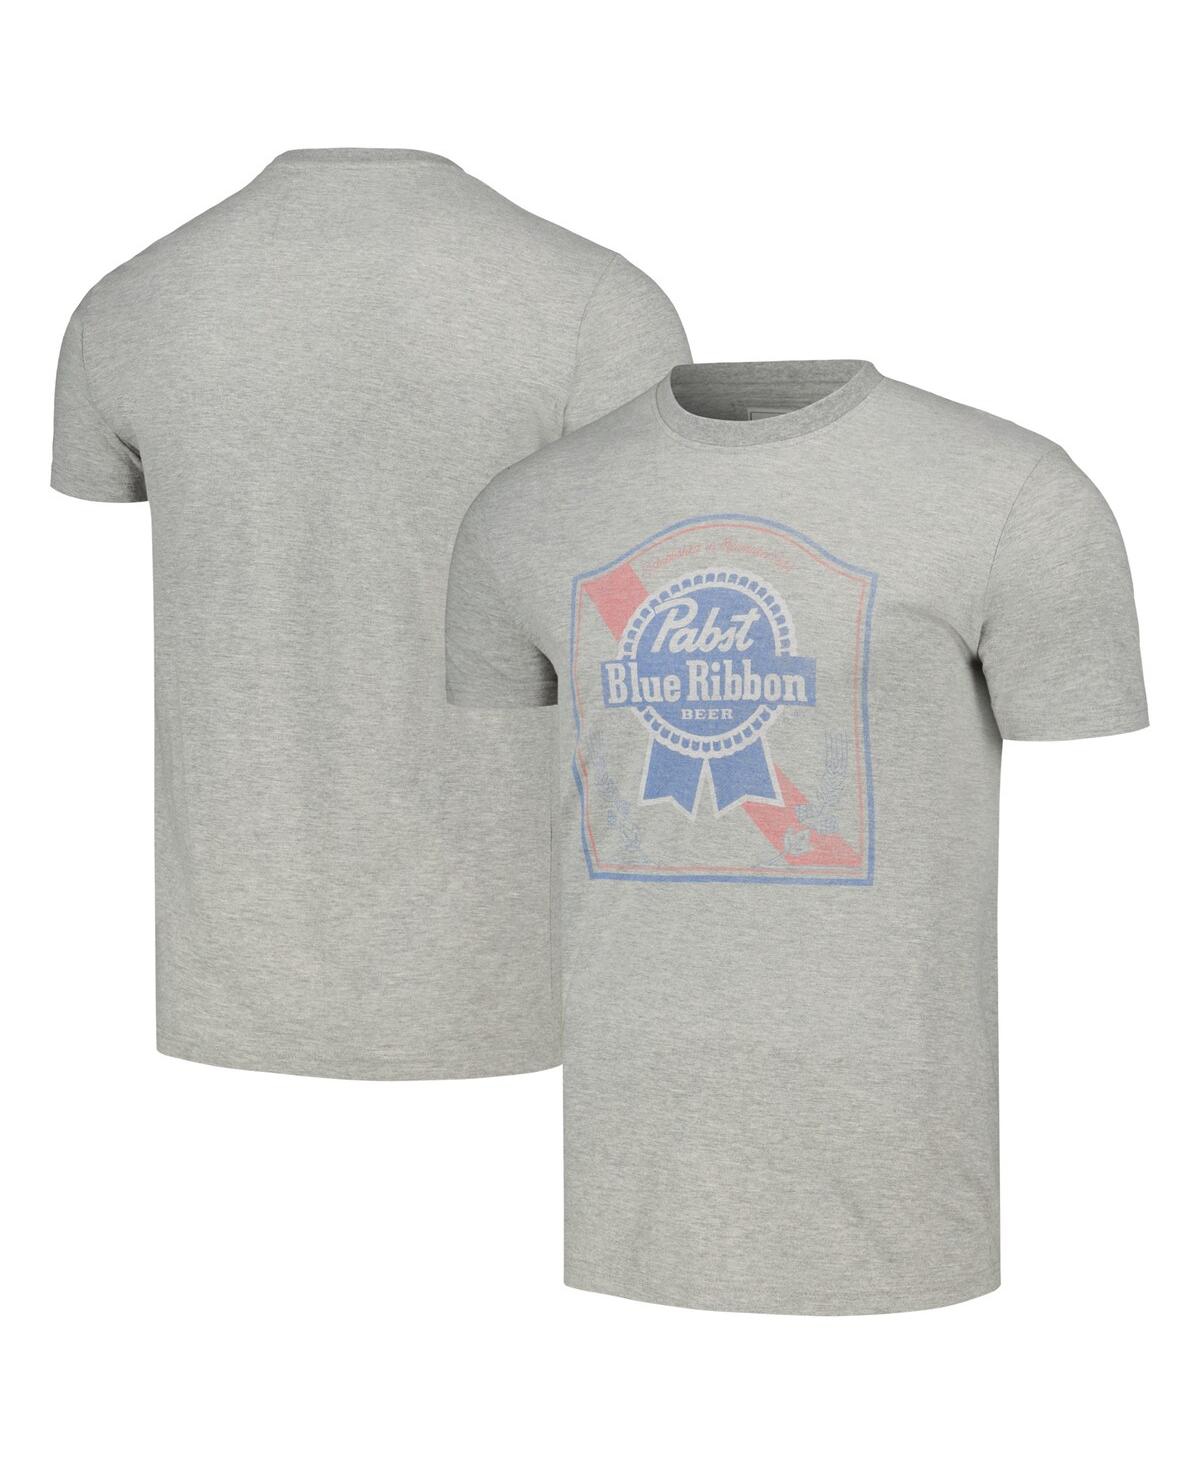 American Needle Men's  Heather Gray Distressed Pabst Blue Ribbon Vintage-like Fade T-shirt